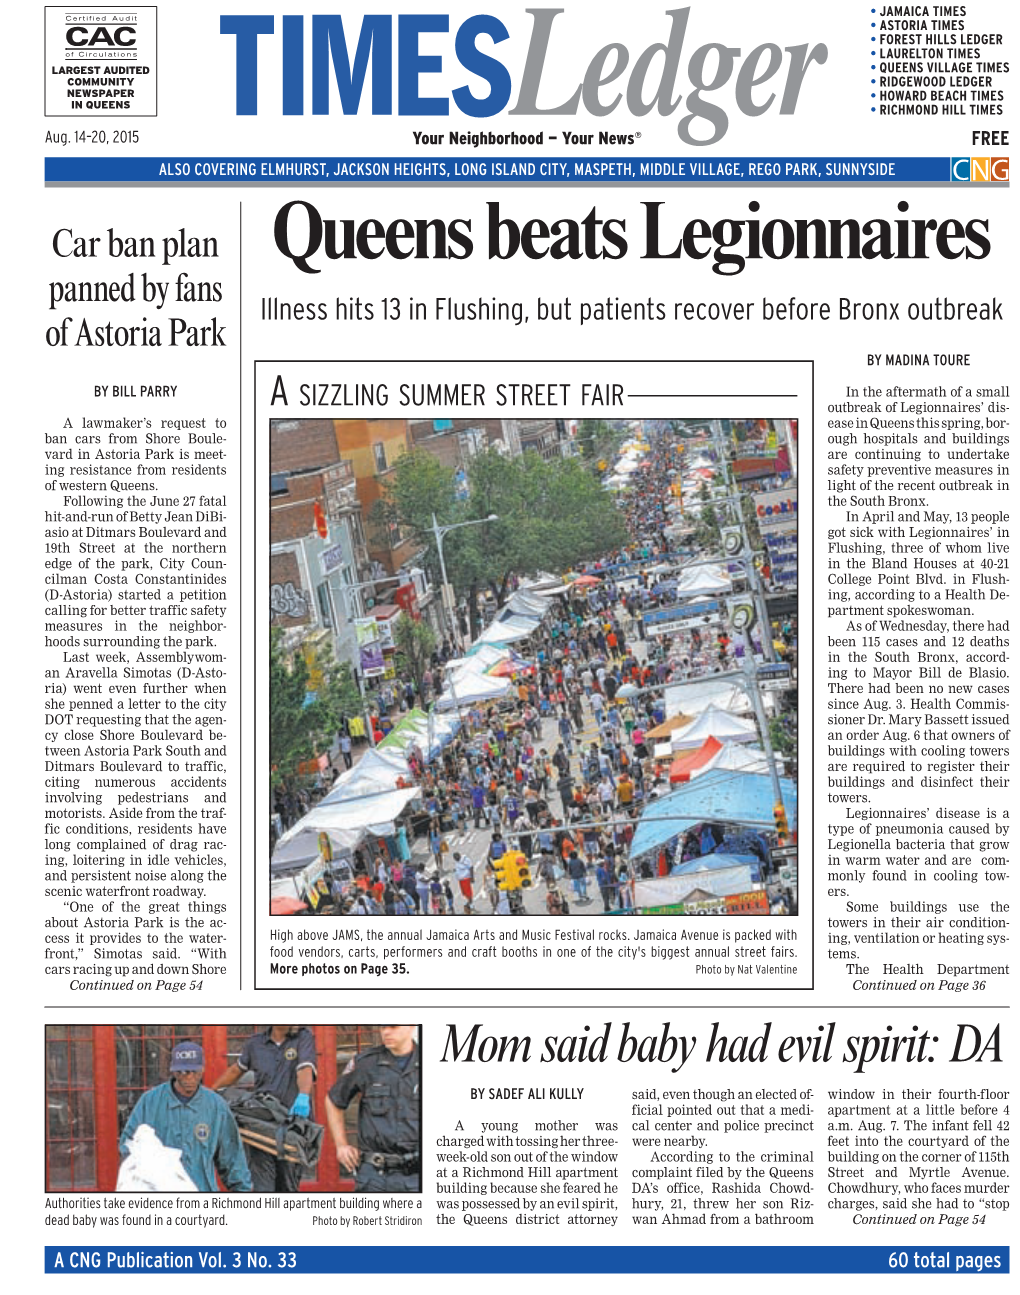 Queens Beats Legionnaires Panned by Fans Illness Hits 13 in Flushing, but Patients Recover Before Bronx Outbreak of Astoria Park by MADINA TOURE